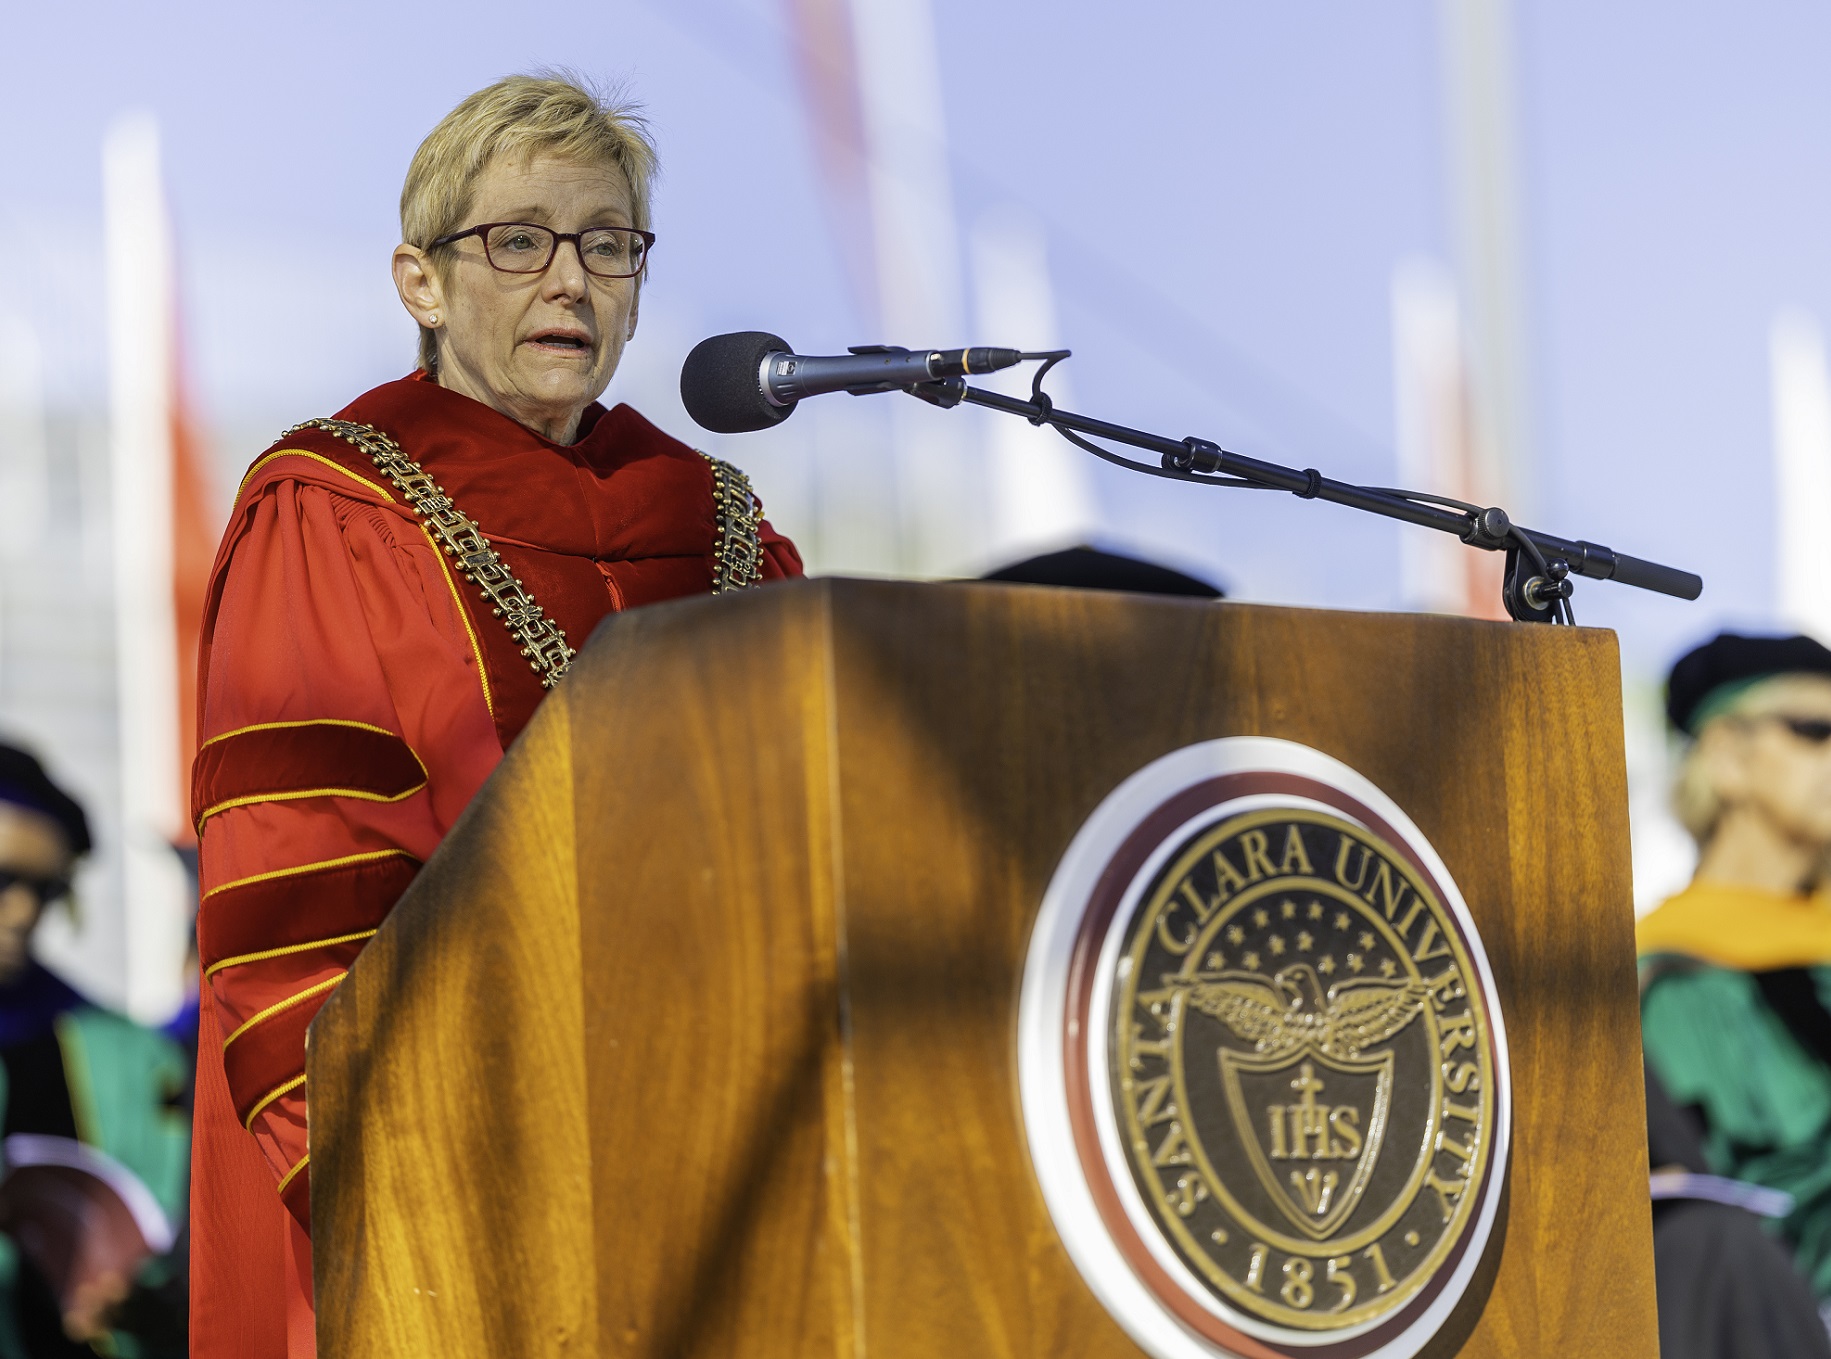 A blonde woman in academic robes at a podium image link to story